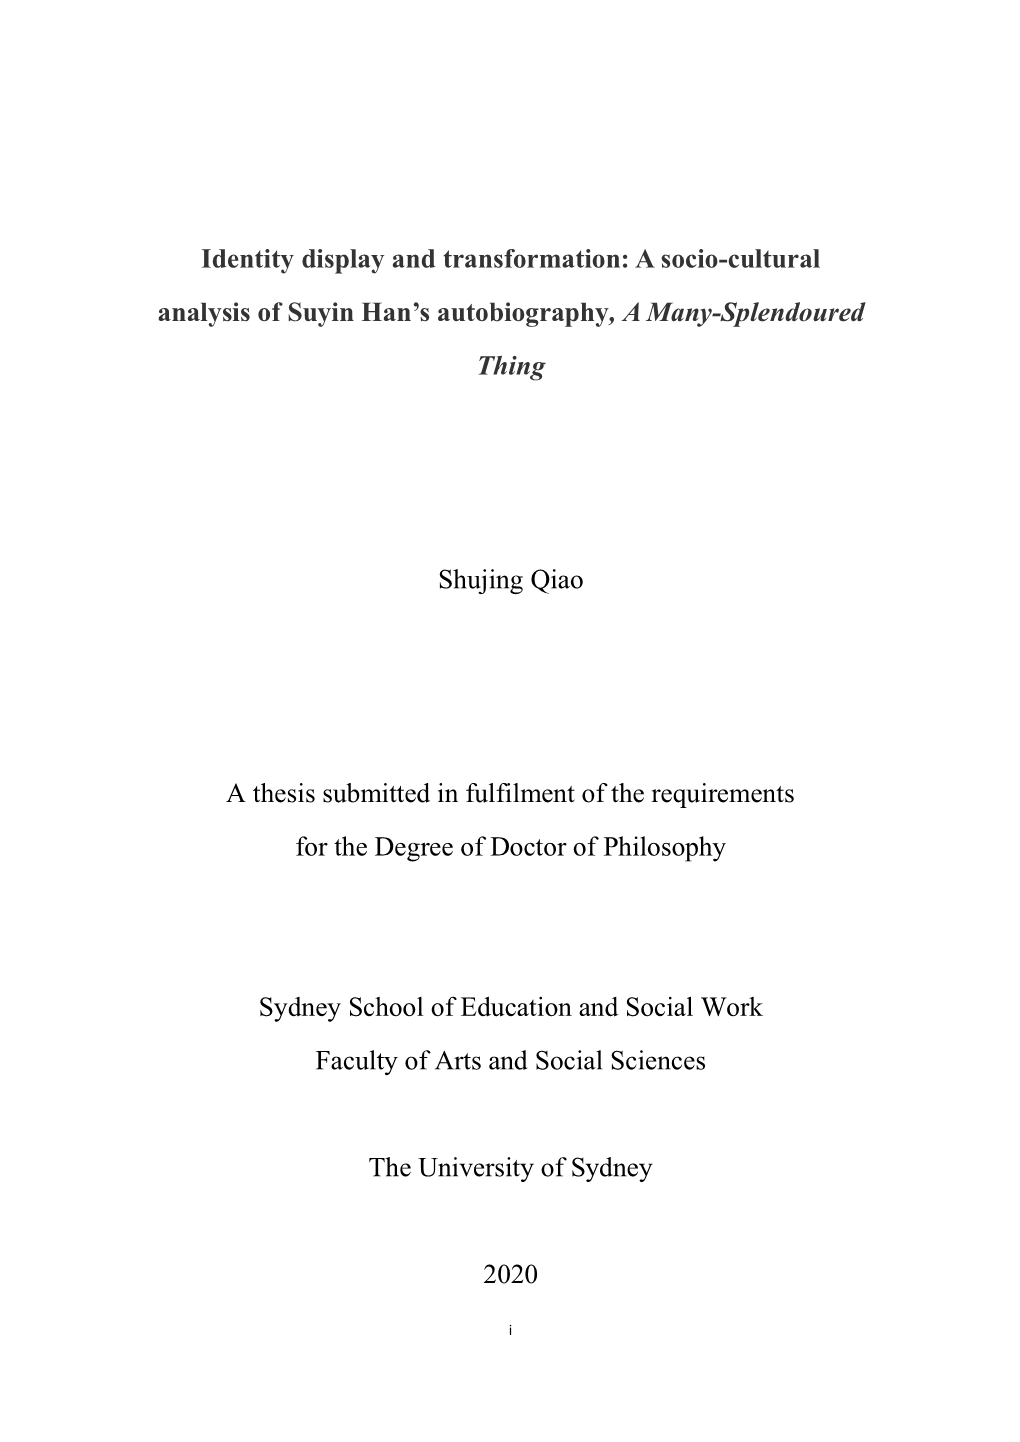 Identity Display and Transformation: a Socio-Cultural Analysis of Suyin Han’S Autobiography, a Many-Splendoured Thing